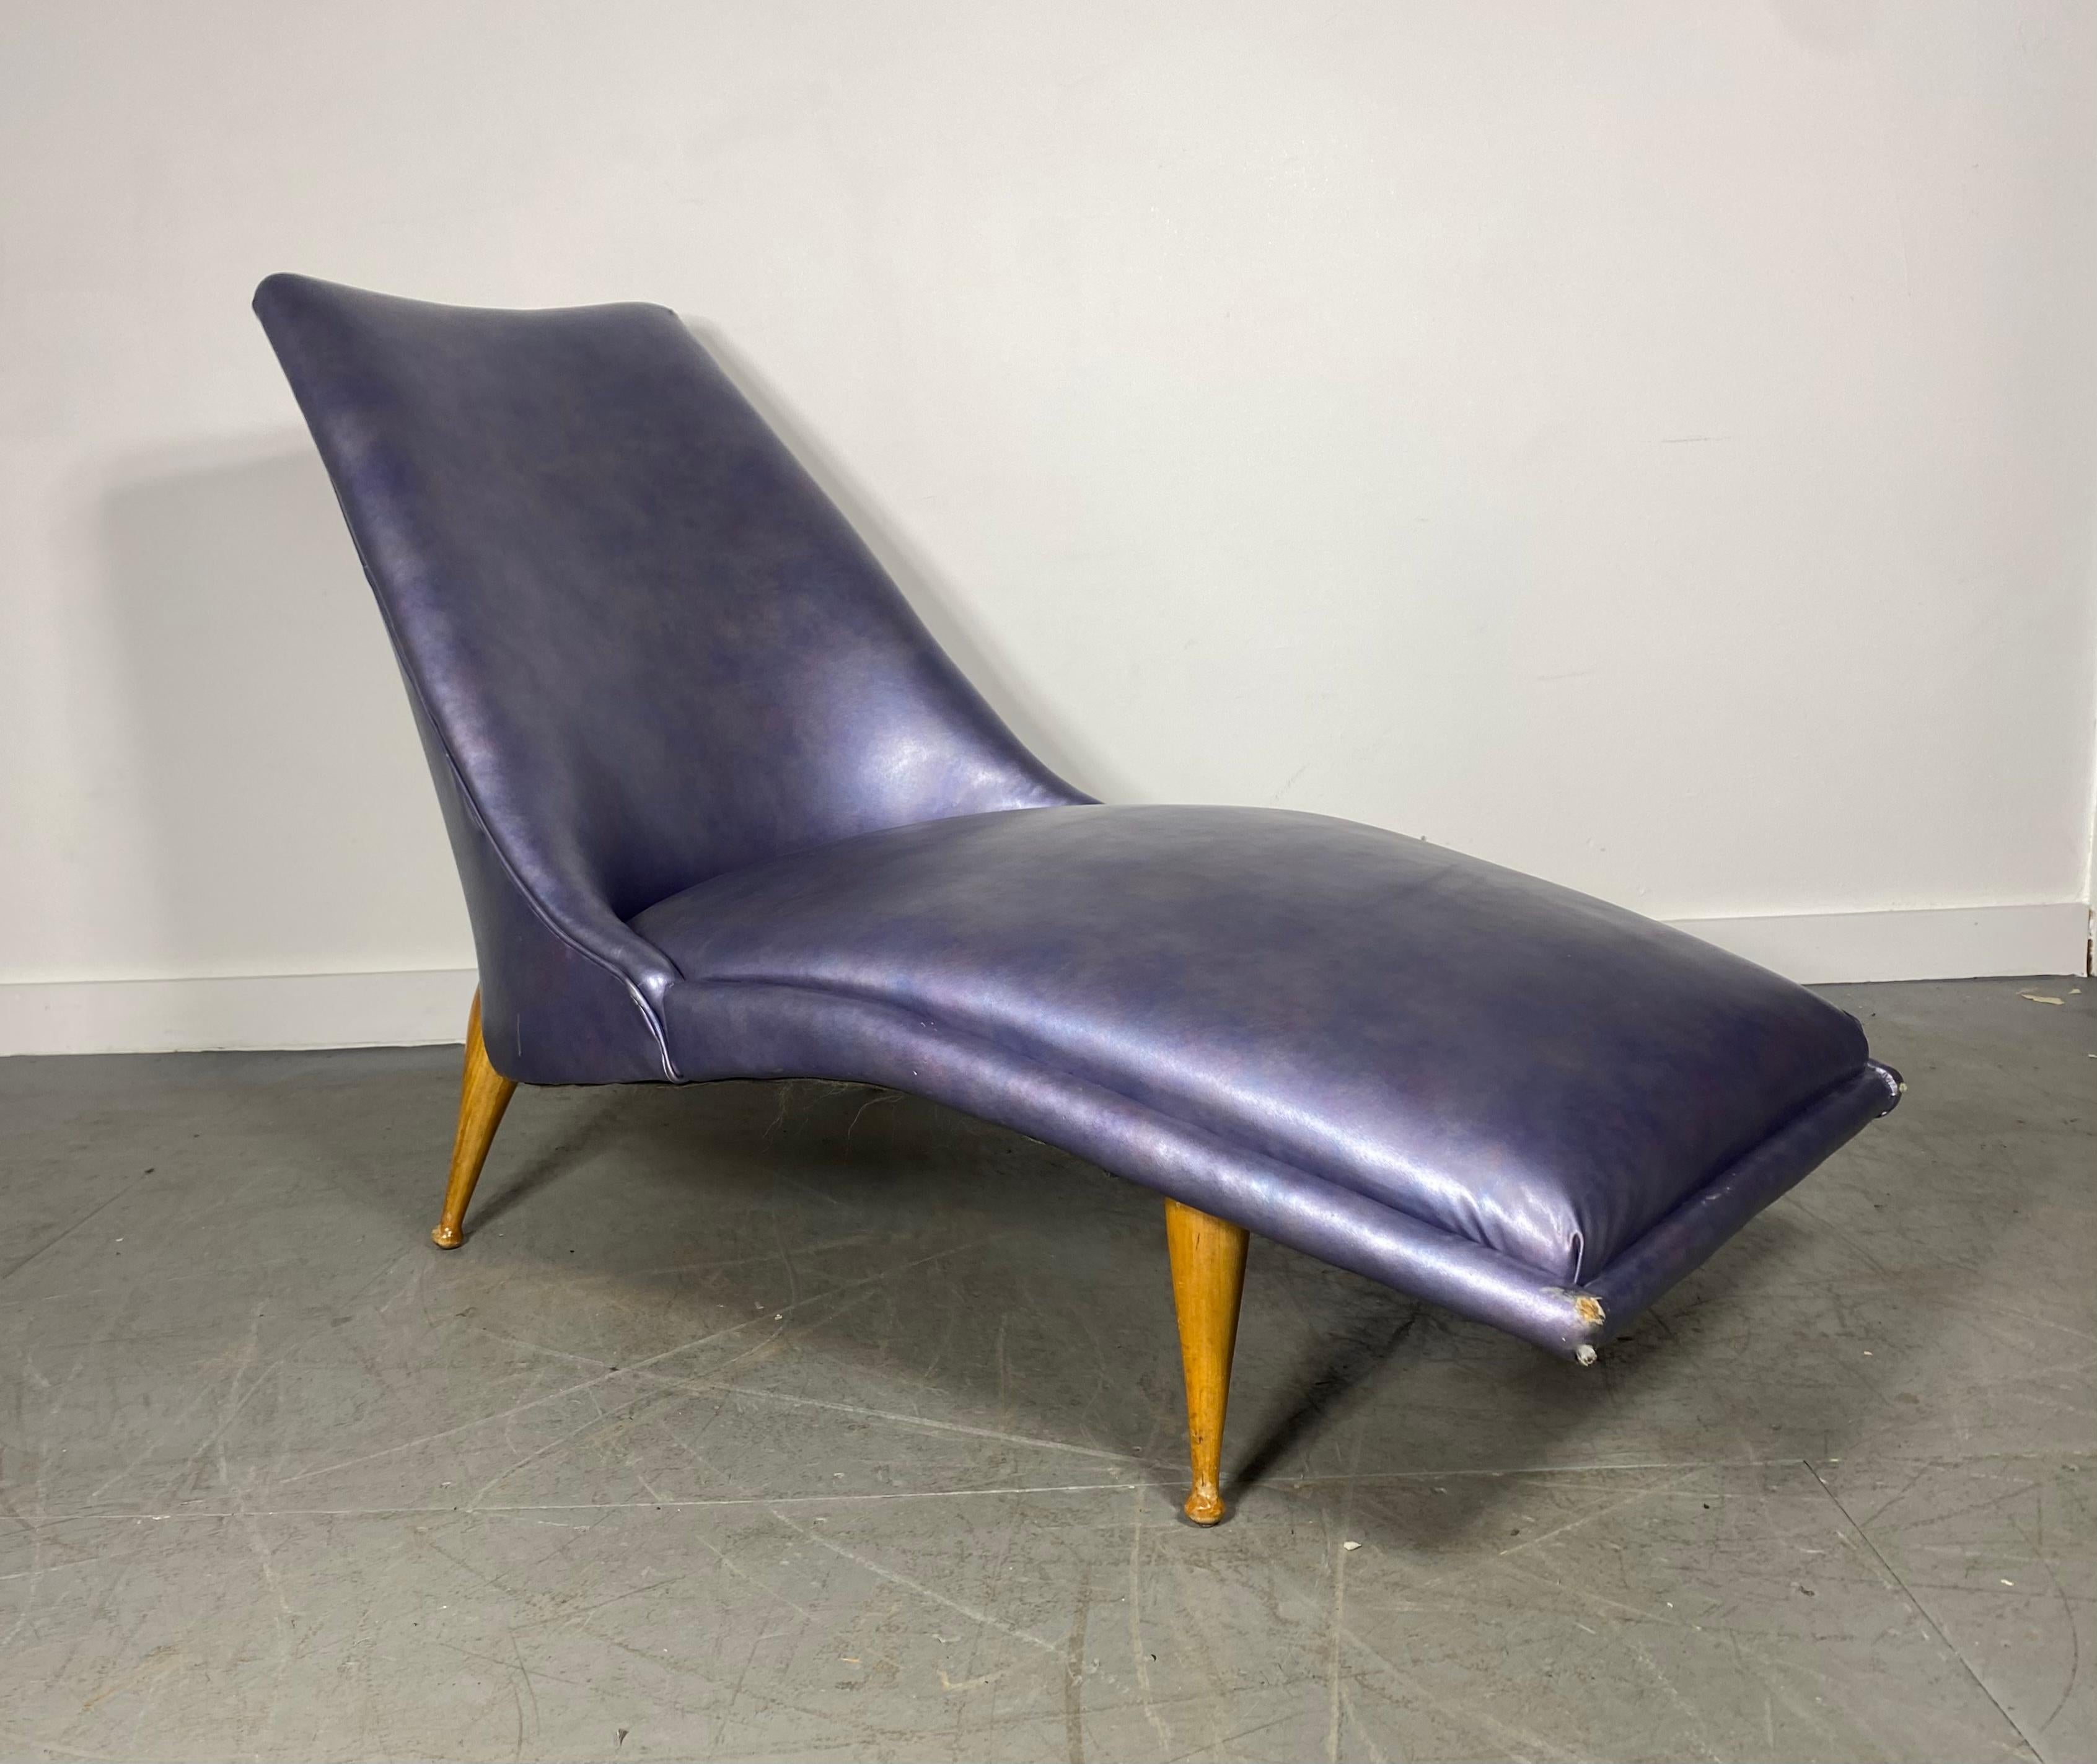 ‘Beautiful Dreamer’ Chaise Lounge by Ben Seibel, USA 1950s, Rare For Sale 1